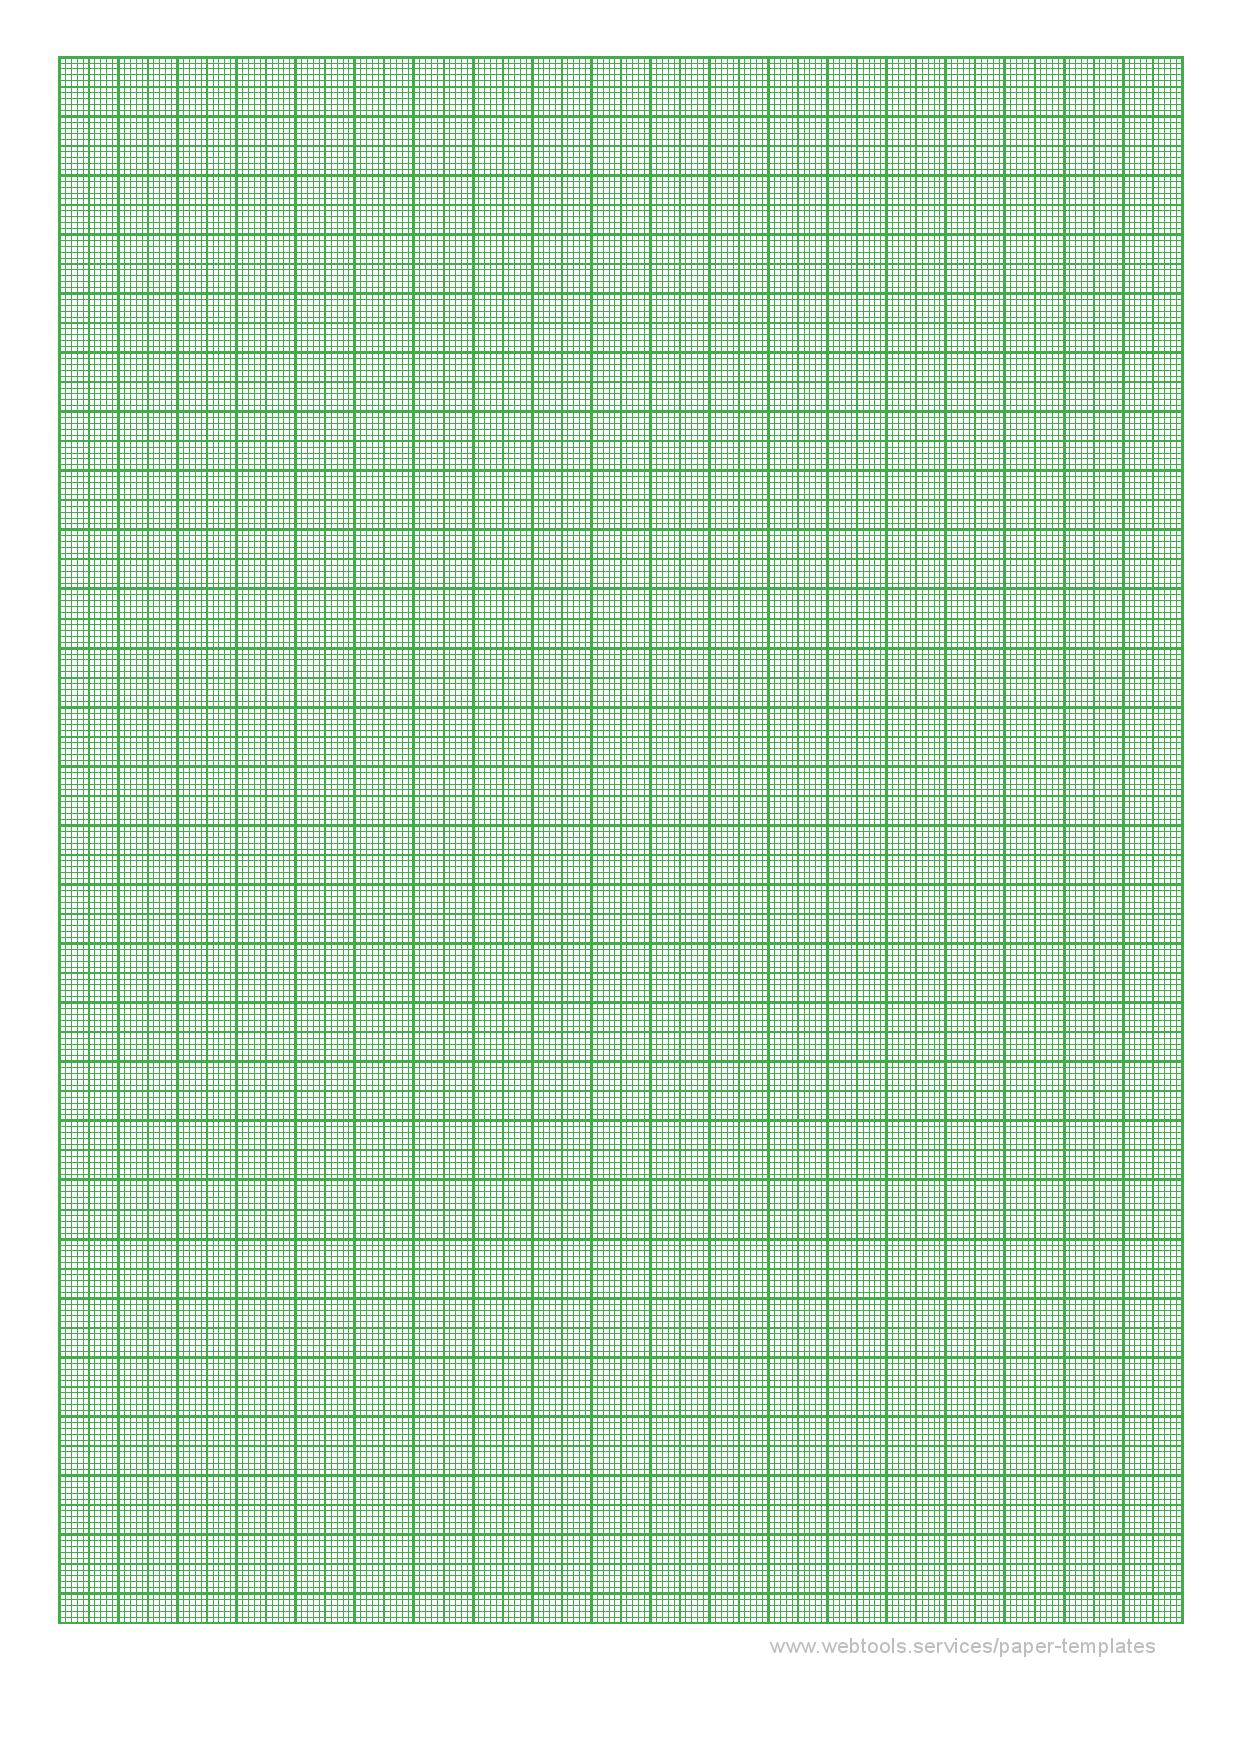 Printable 1mm Graph Paper With Green Color Lines A4 With 0.375 In Border Page 001 